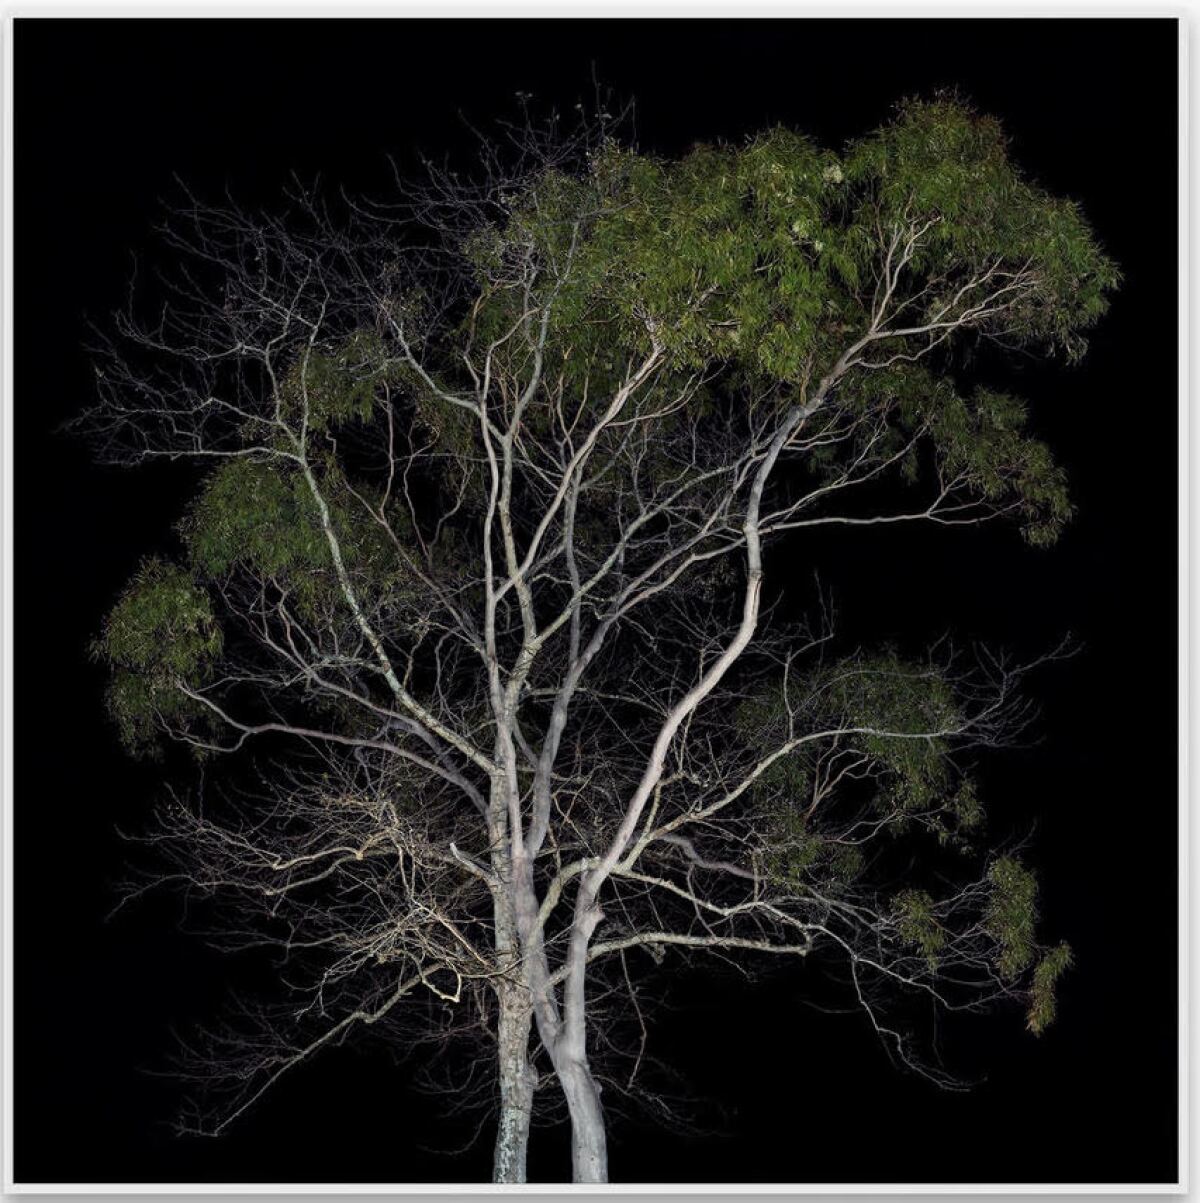 A color photograph taken at night shows two intertwined trees against a black sky.